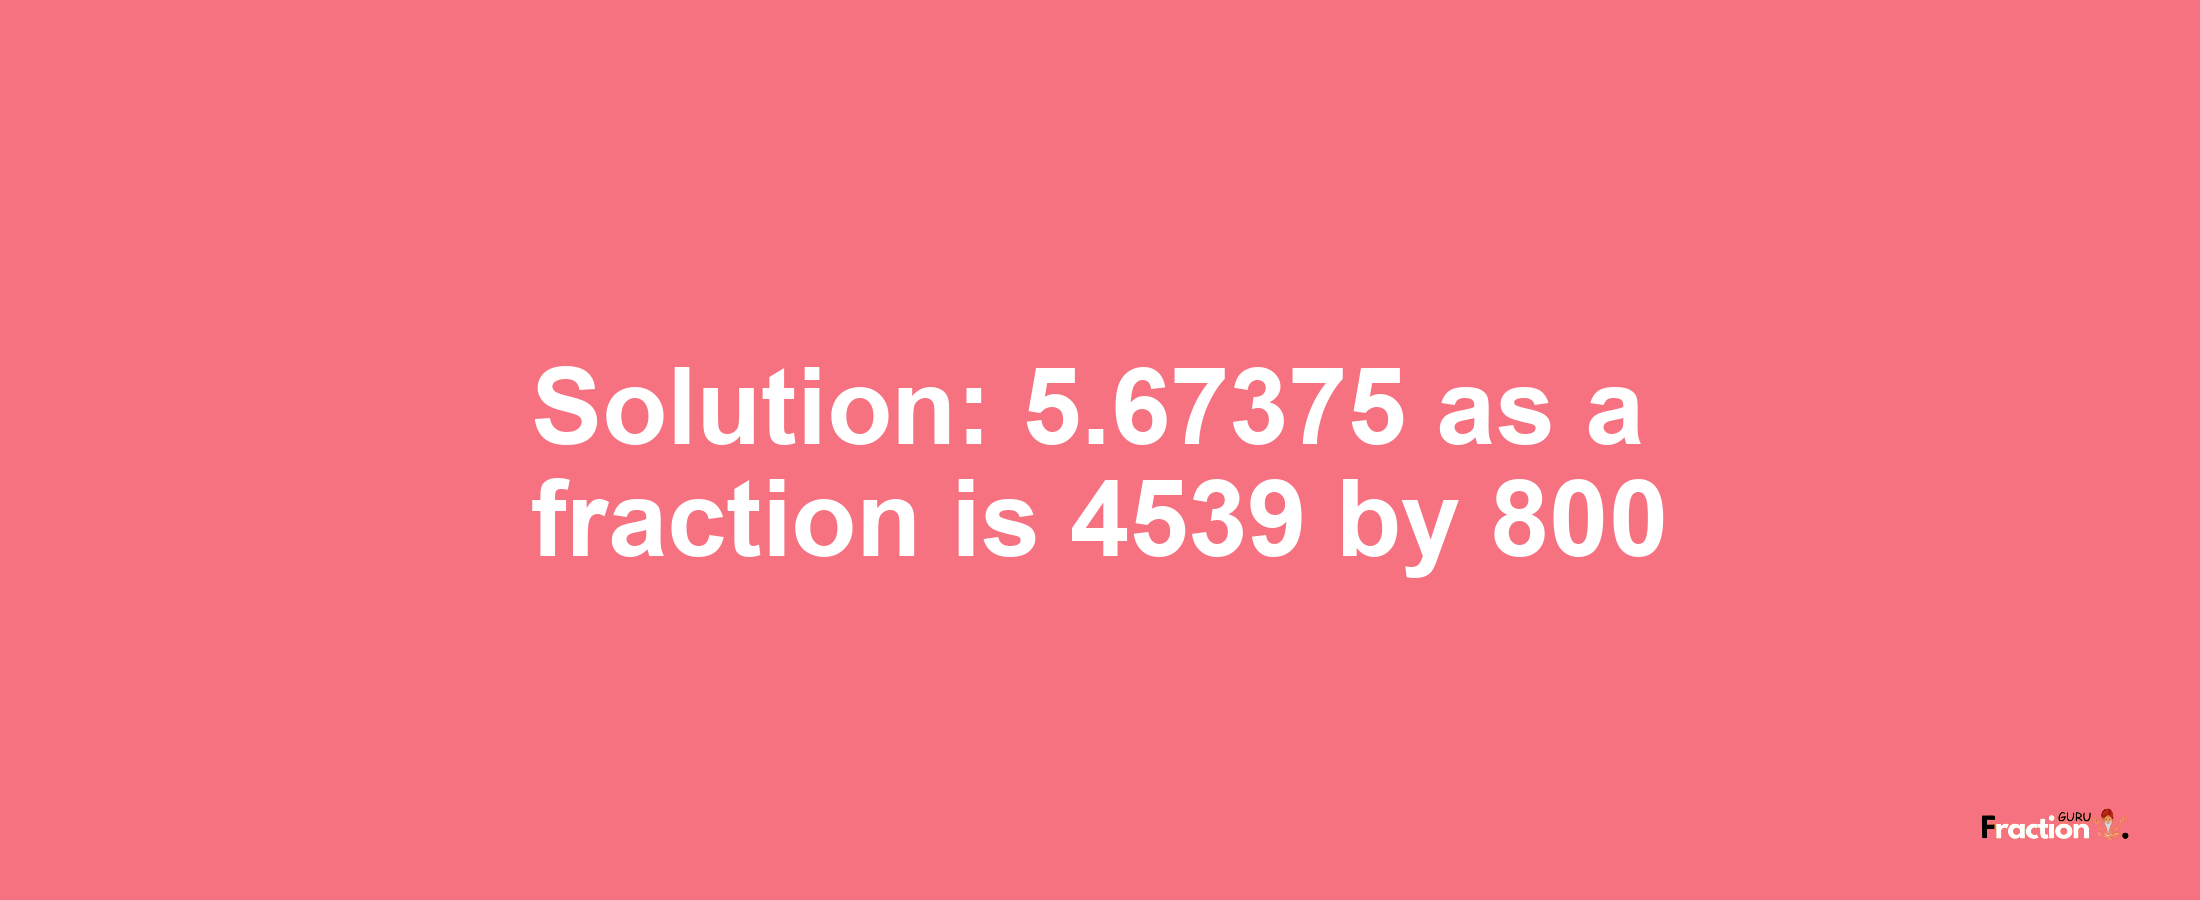 Solution:5.67375 as a fraction is 4539/800